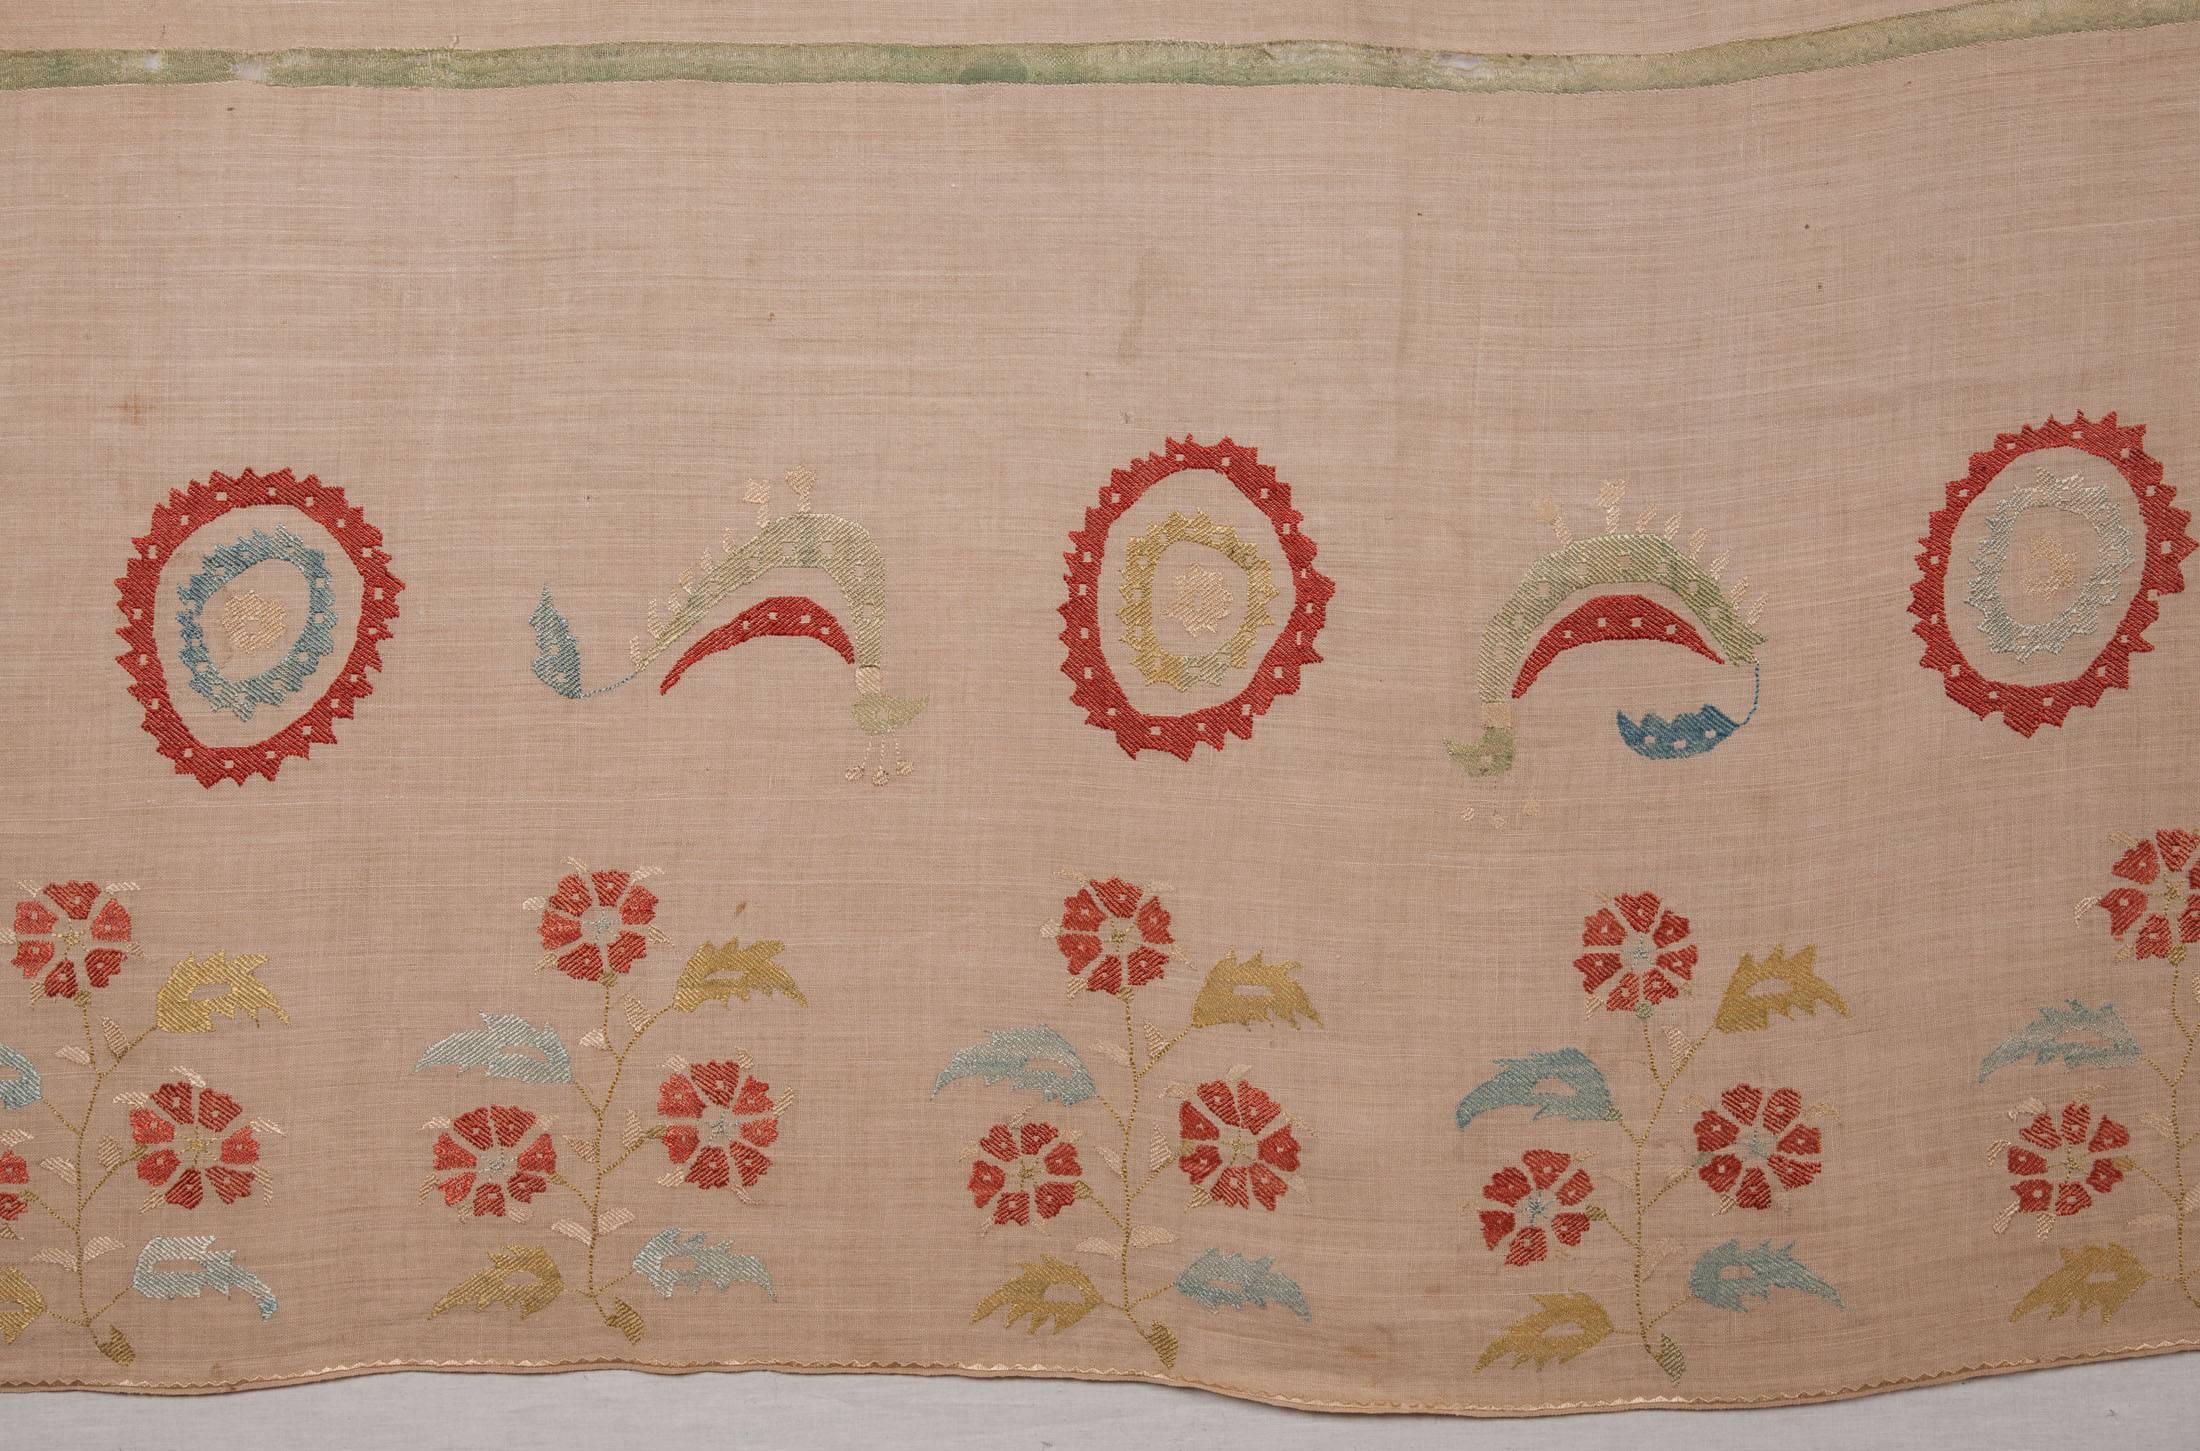 A rare item in pretty good condition in silk embroidery on silk background cloth with zoomorphic imagery.